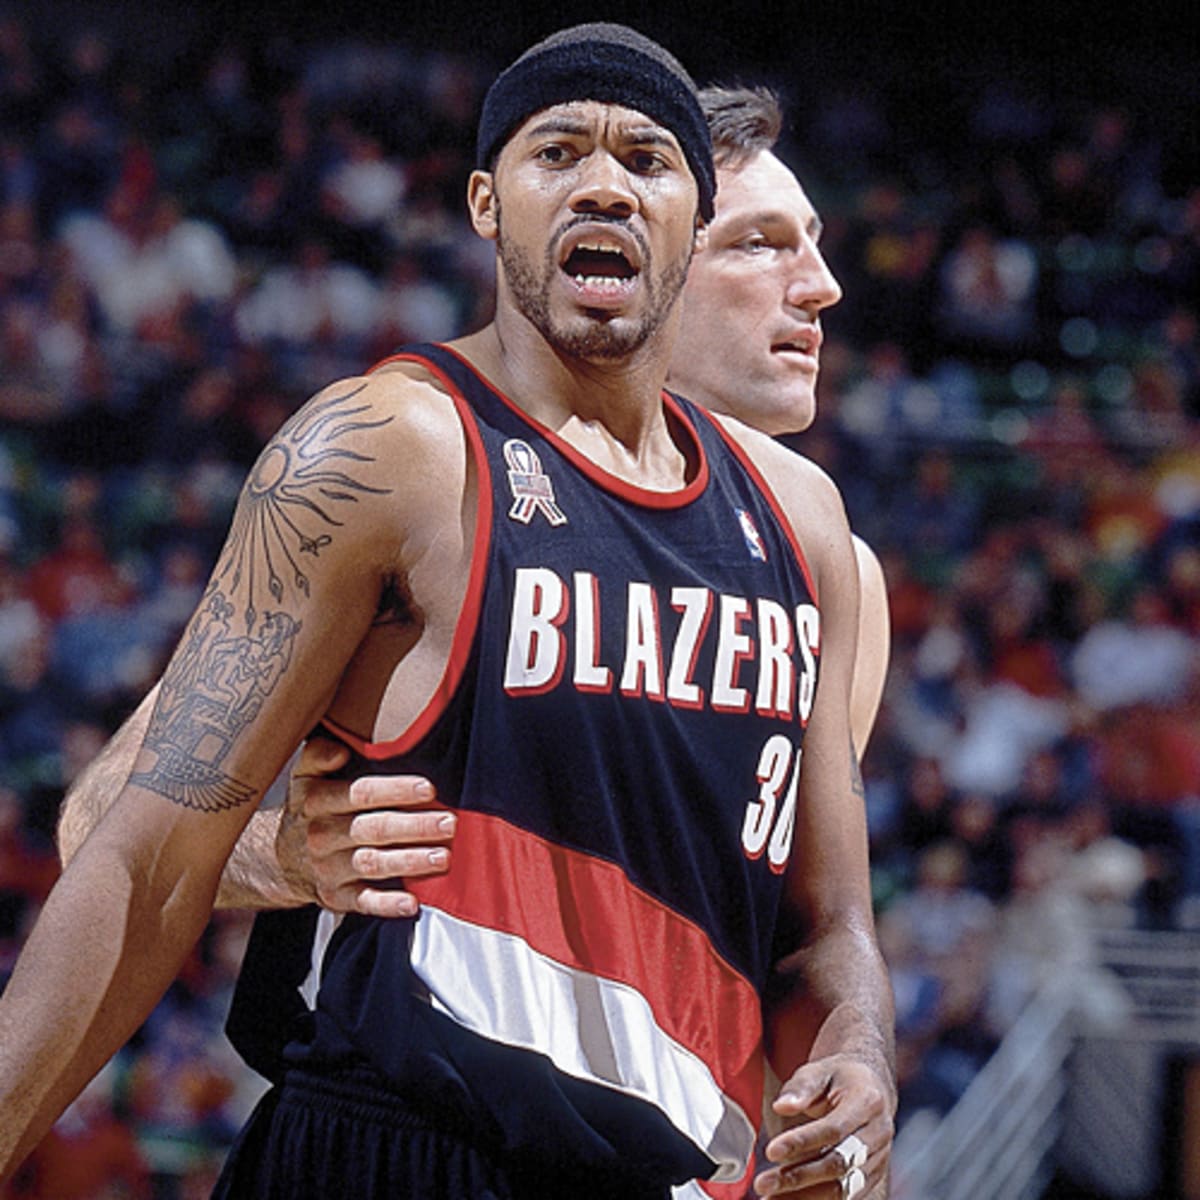 Person of Interest: Rasheed Wallace